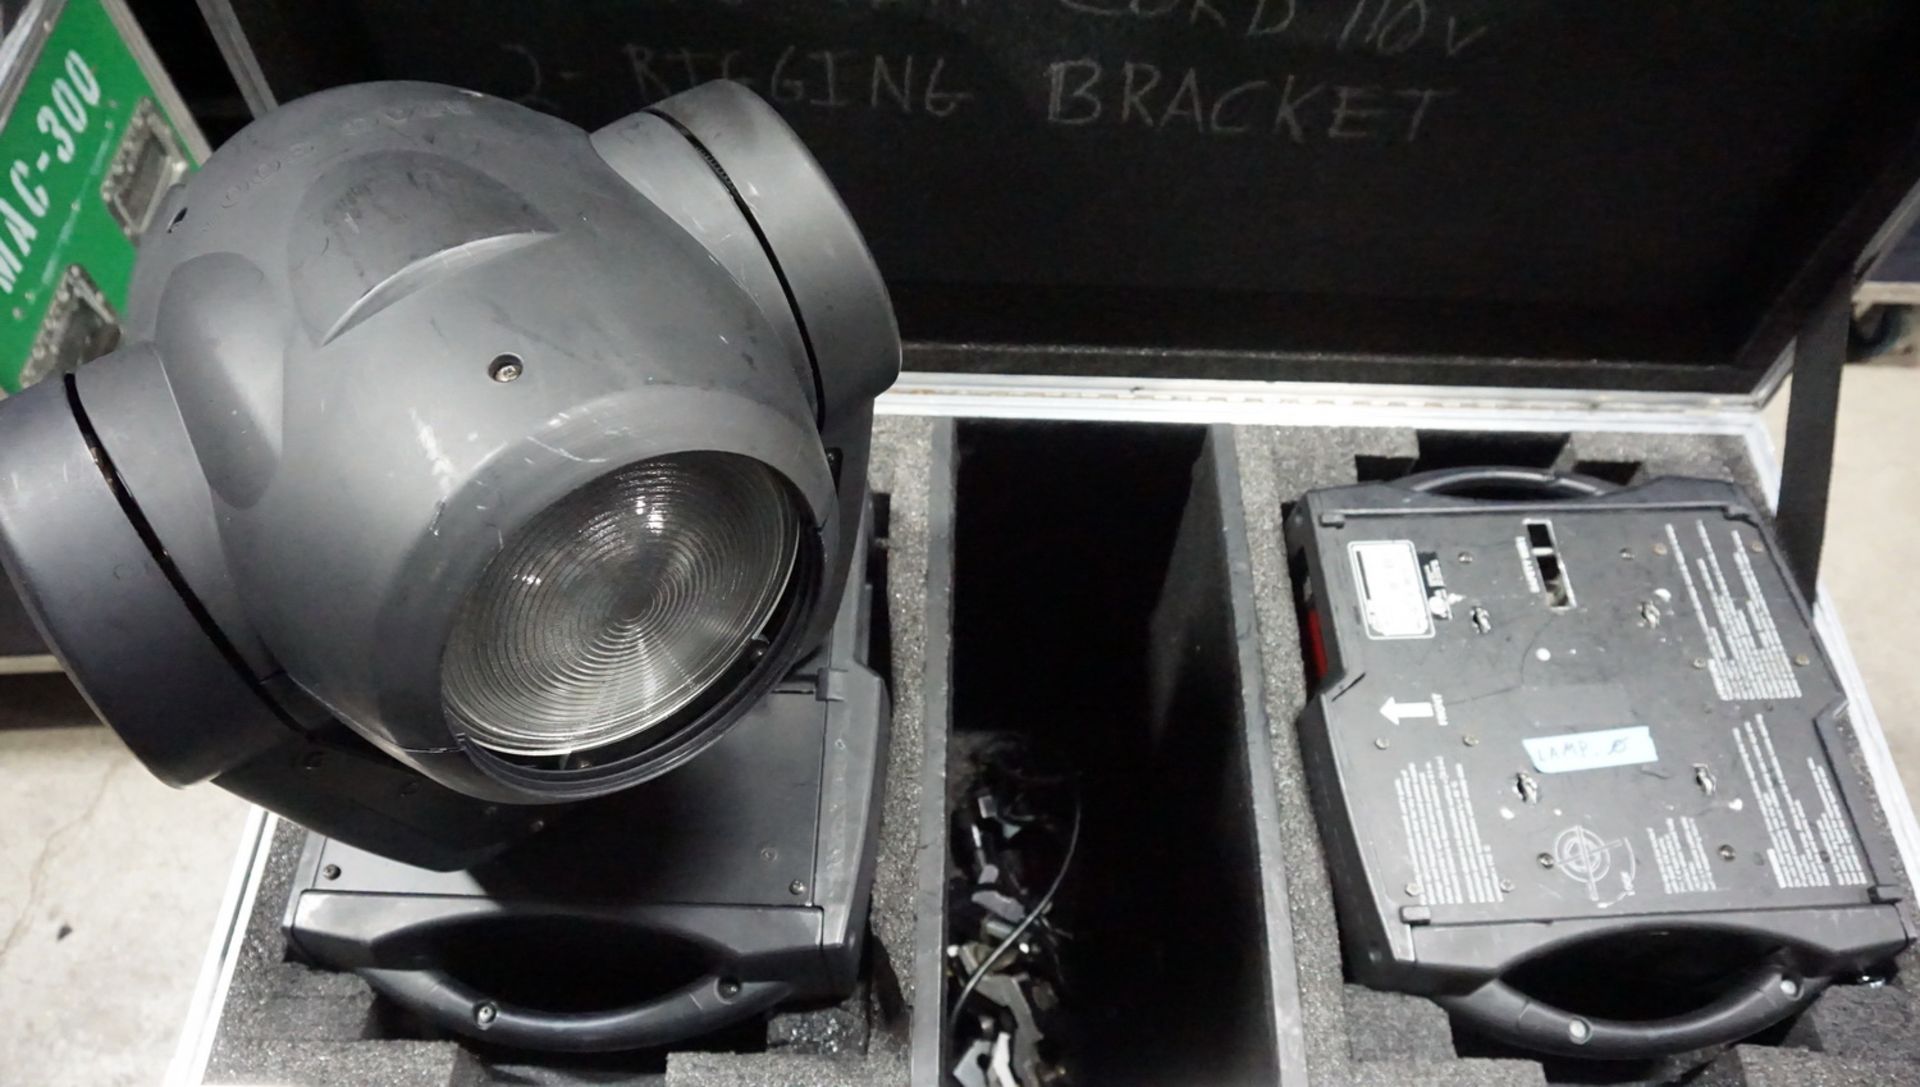 UNITS - MARTIN MAC 300 MOVING HEAD STAGE WASH LIGHTS C/W ROLLING HARD CASE - Image 2 of 2